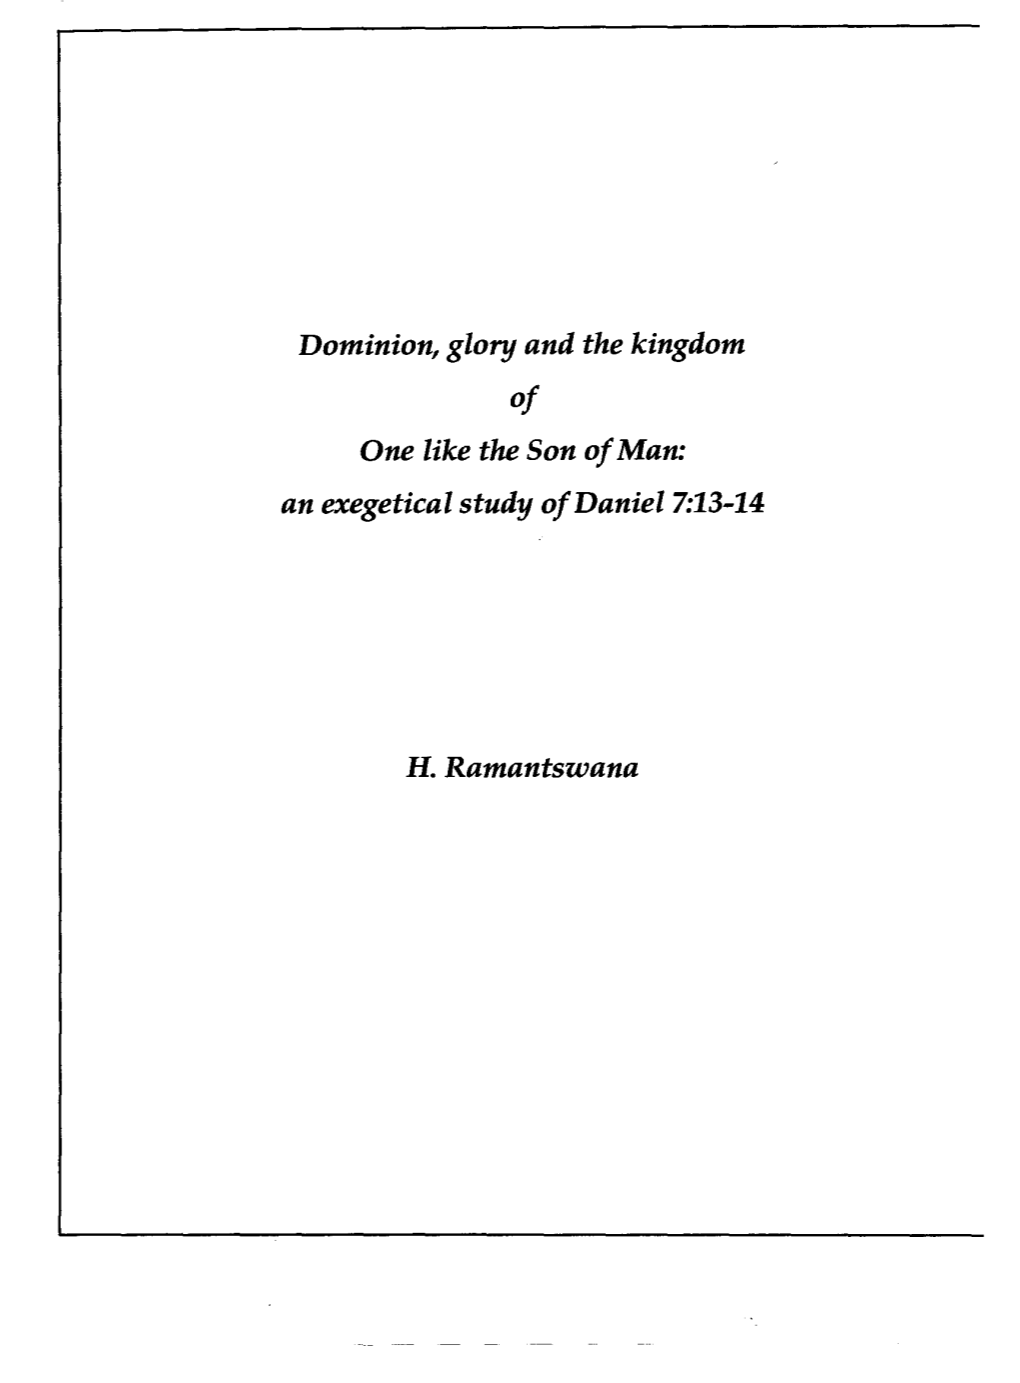 Dominion, Glory and the Kingdom of One Like the Son of Man: an Exegetical Study of Daniel 7:13-14 H. Ramantswana